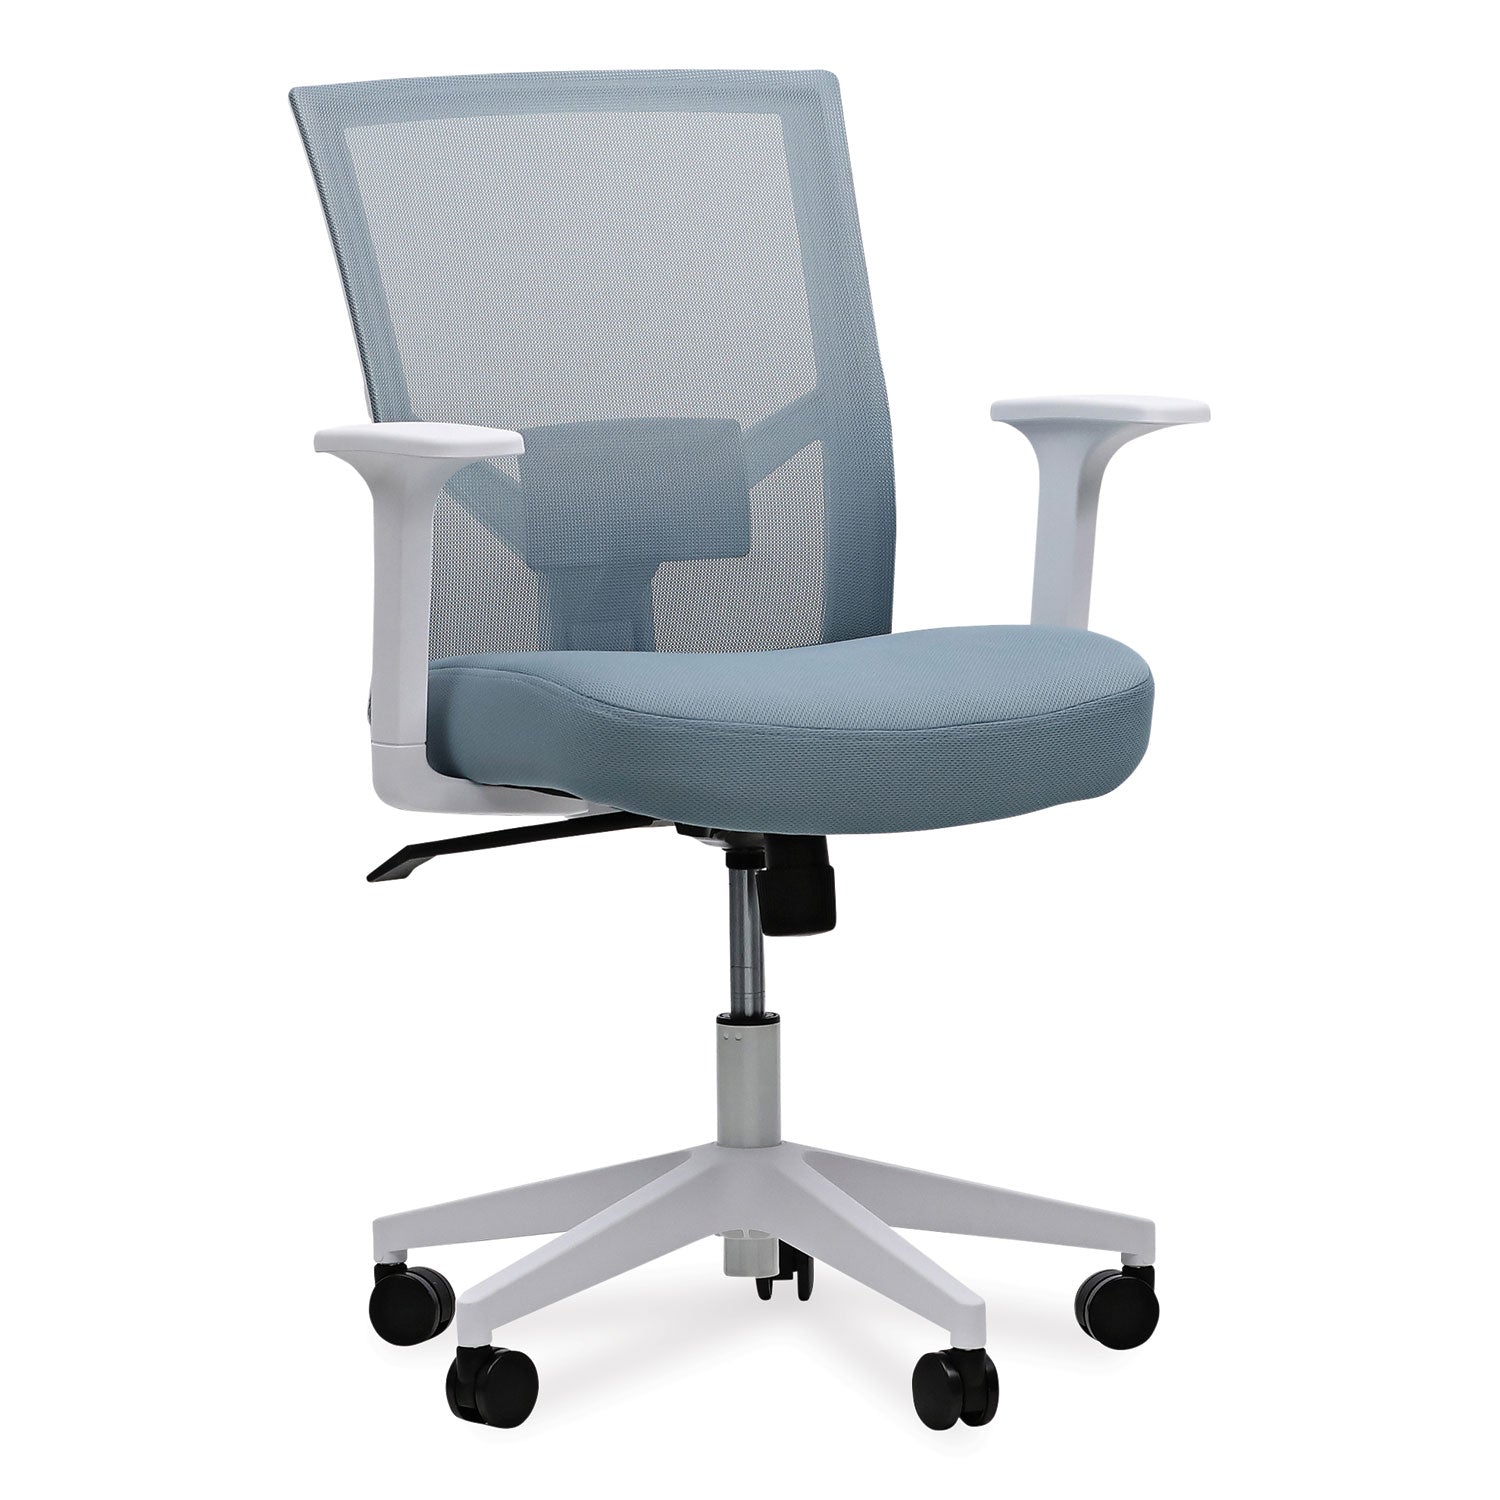 mesh-back-fabric-task-chair-supports-up-to-275-lb-1732-to-211-seat-height-seafoam-blue-seat-back_alews42b77 - 1